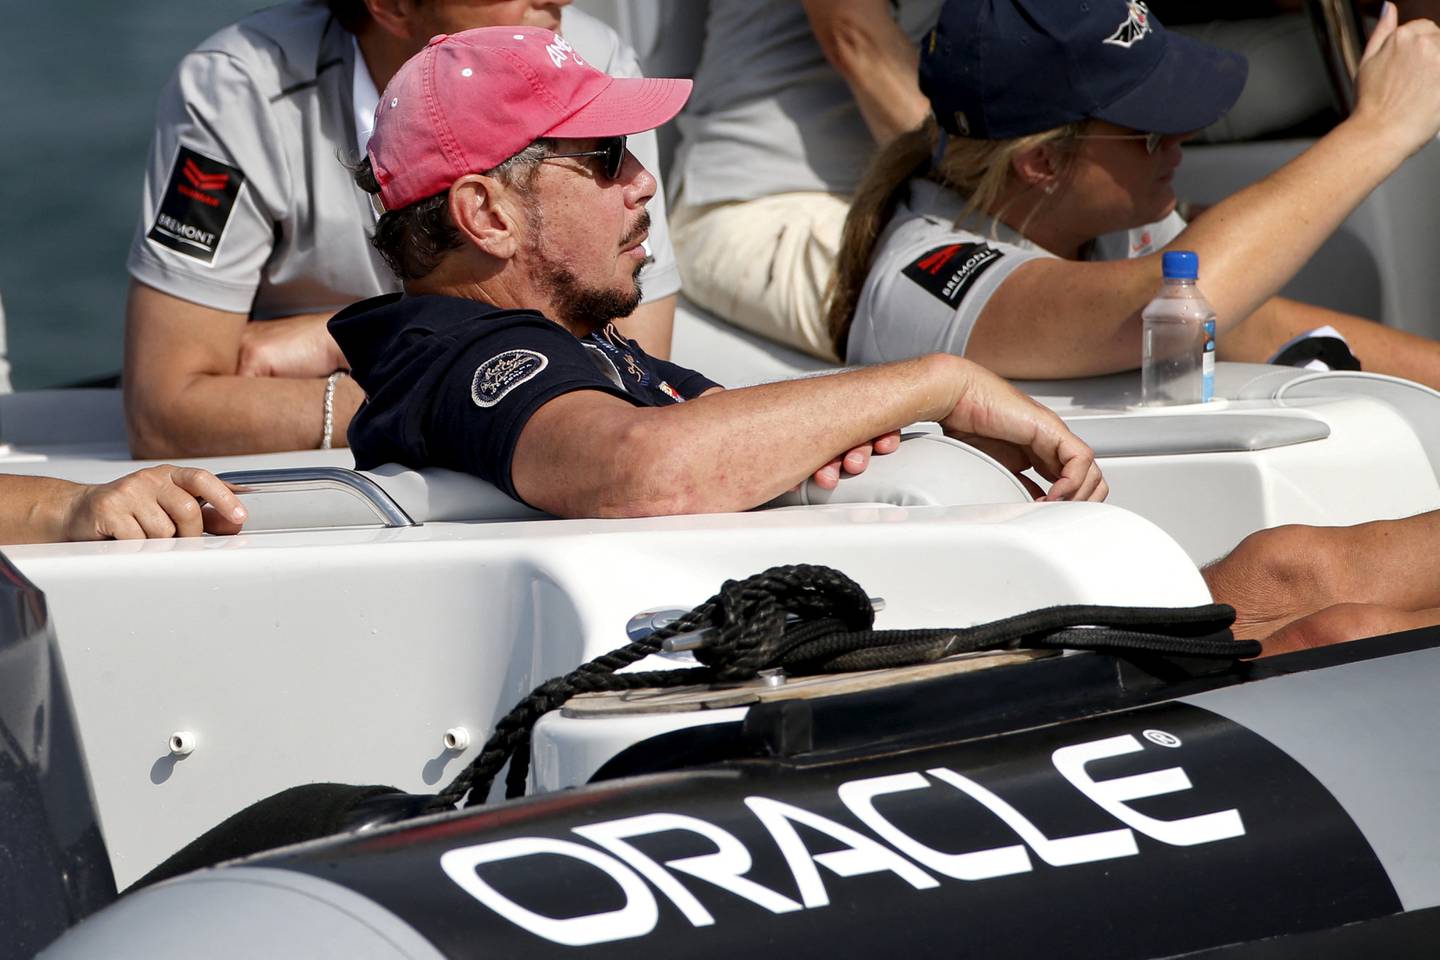 Larry Ellison, founder and former chief executive of Oracle. Reuters